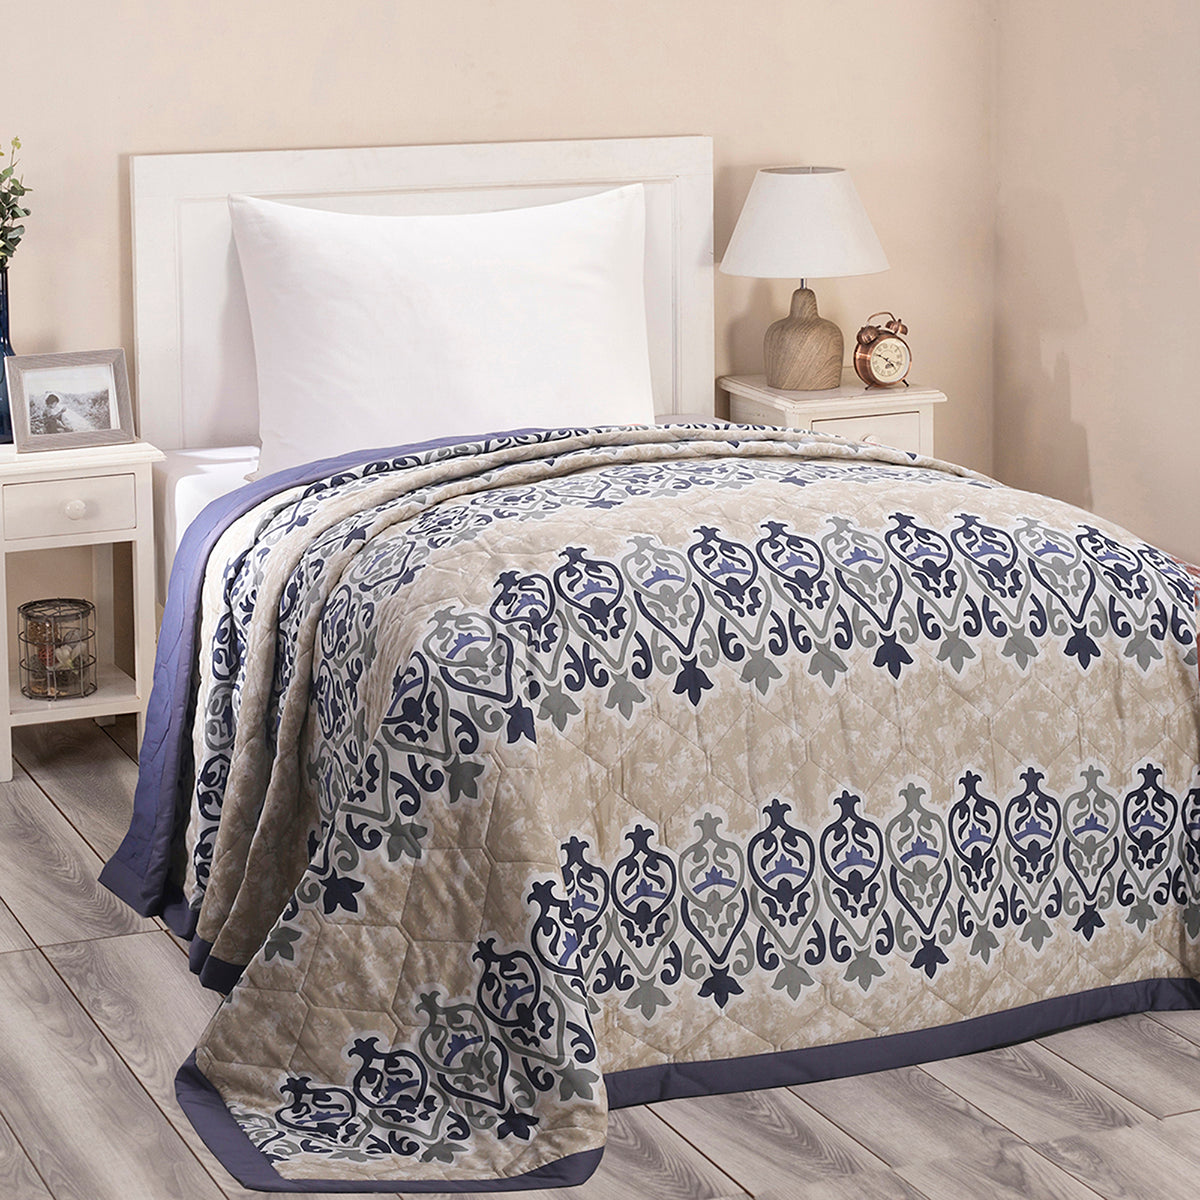 Nouveau Tradition Kaleen Global Summer AC Quilt/Quilted Bed Cover/Comforter Blue